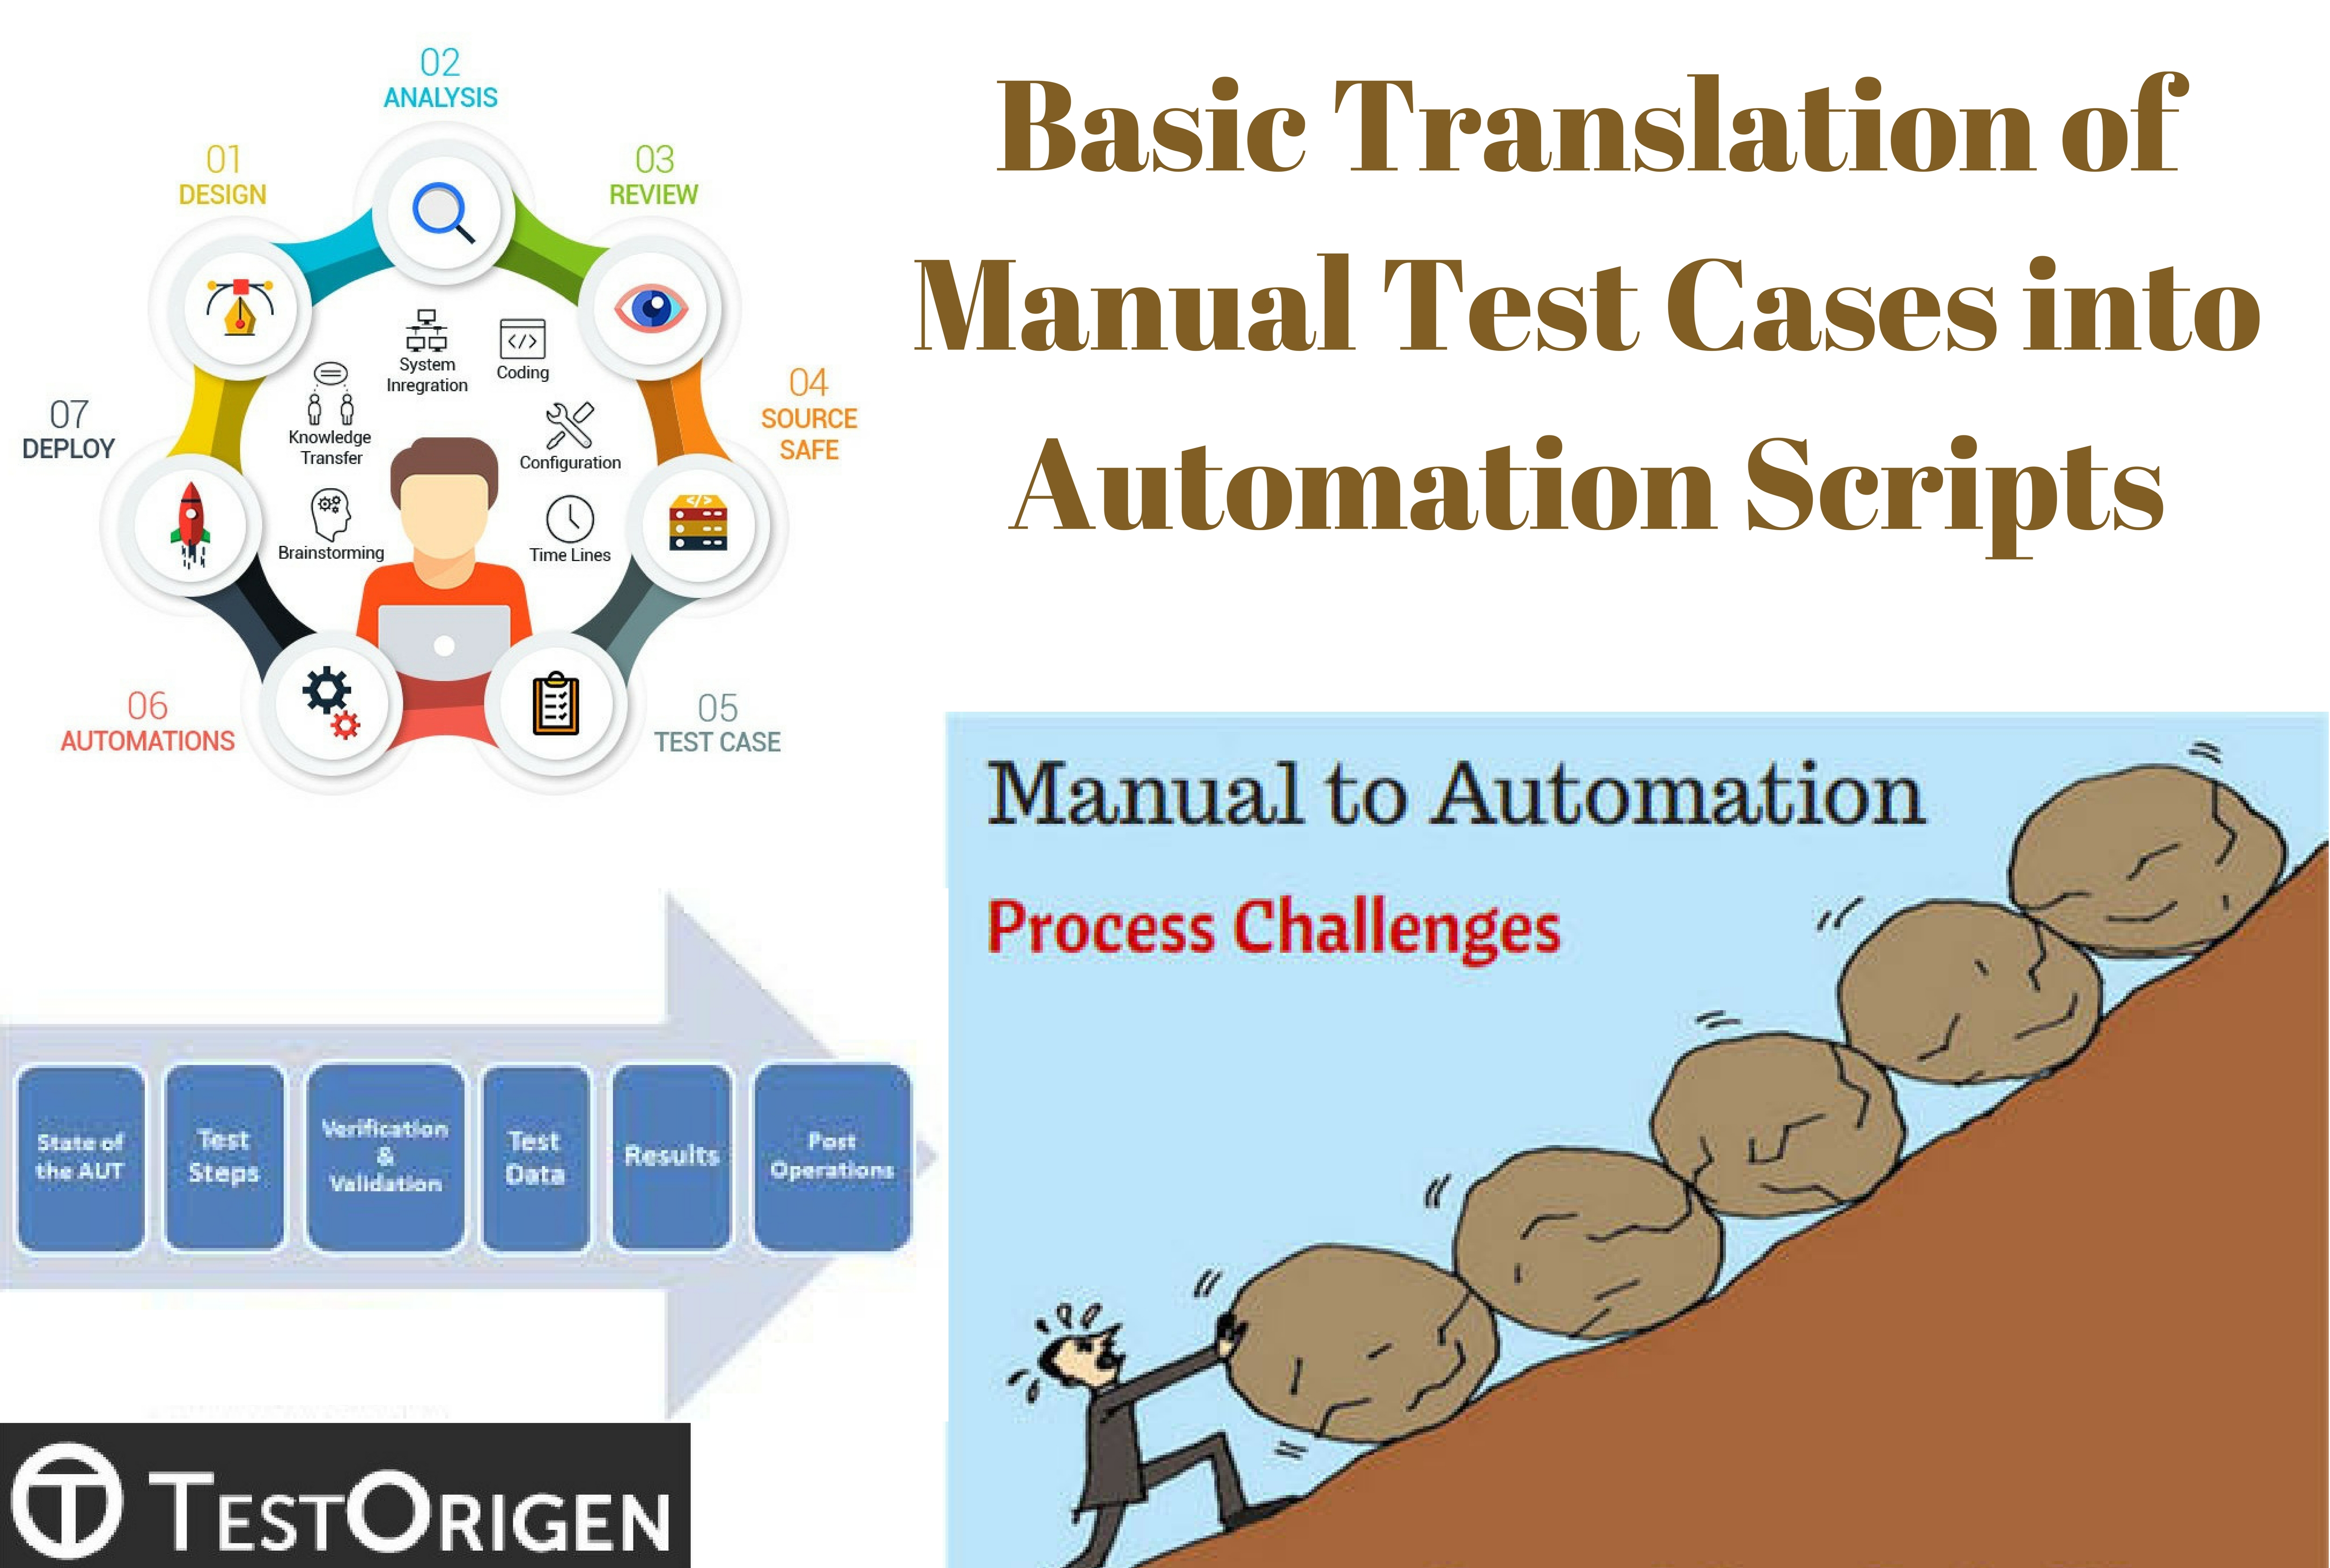 Basic Translation of Manual Test Cases into Automation Scripts